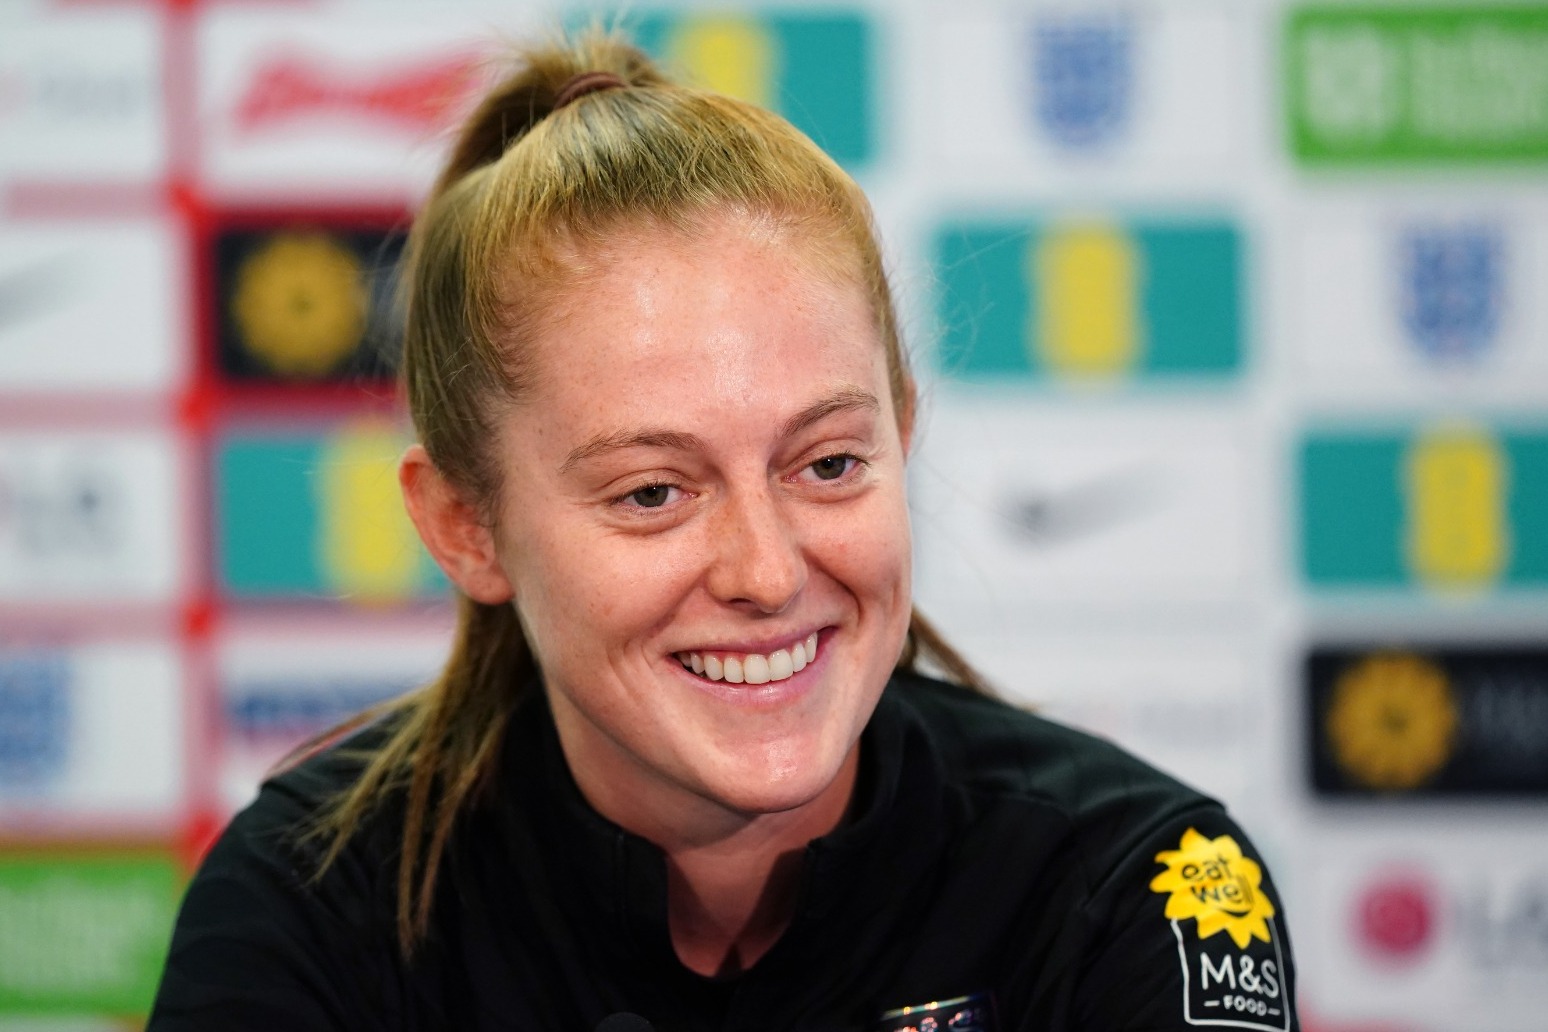 Barcelona agree world-record fee with Man City for England star Keira Walsh 